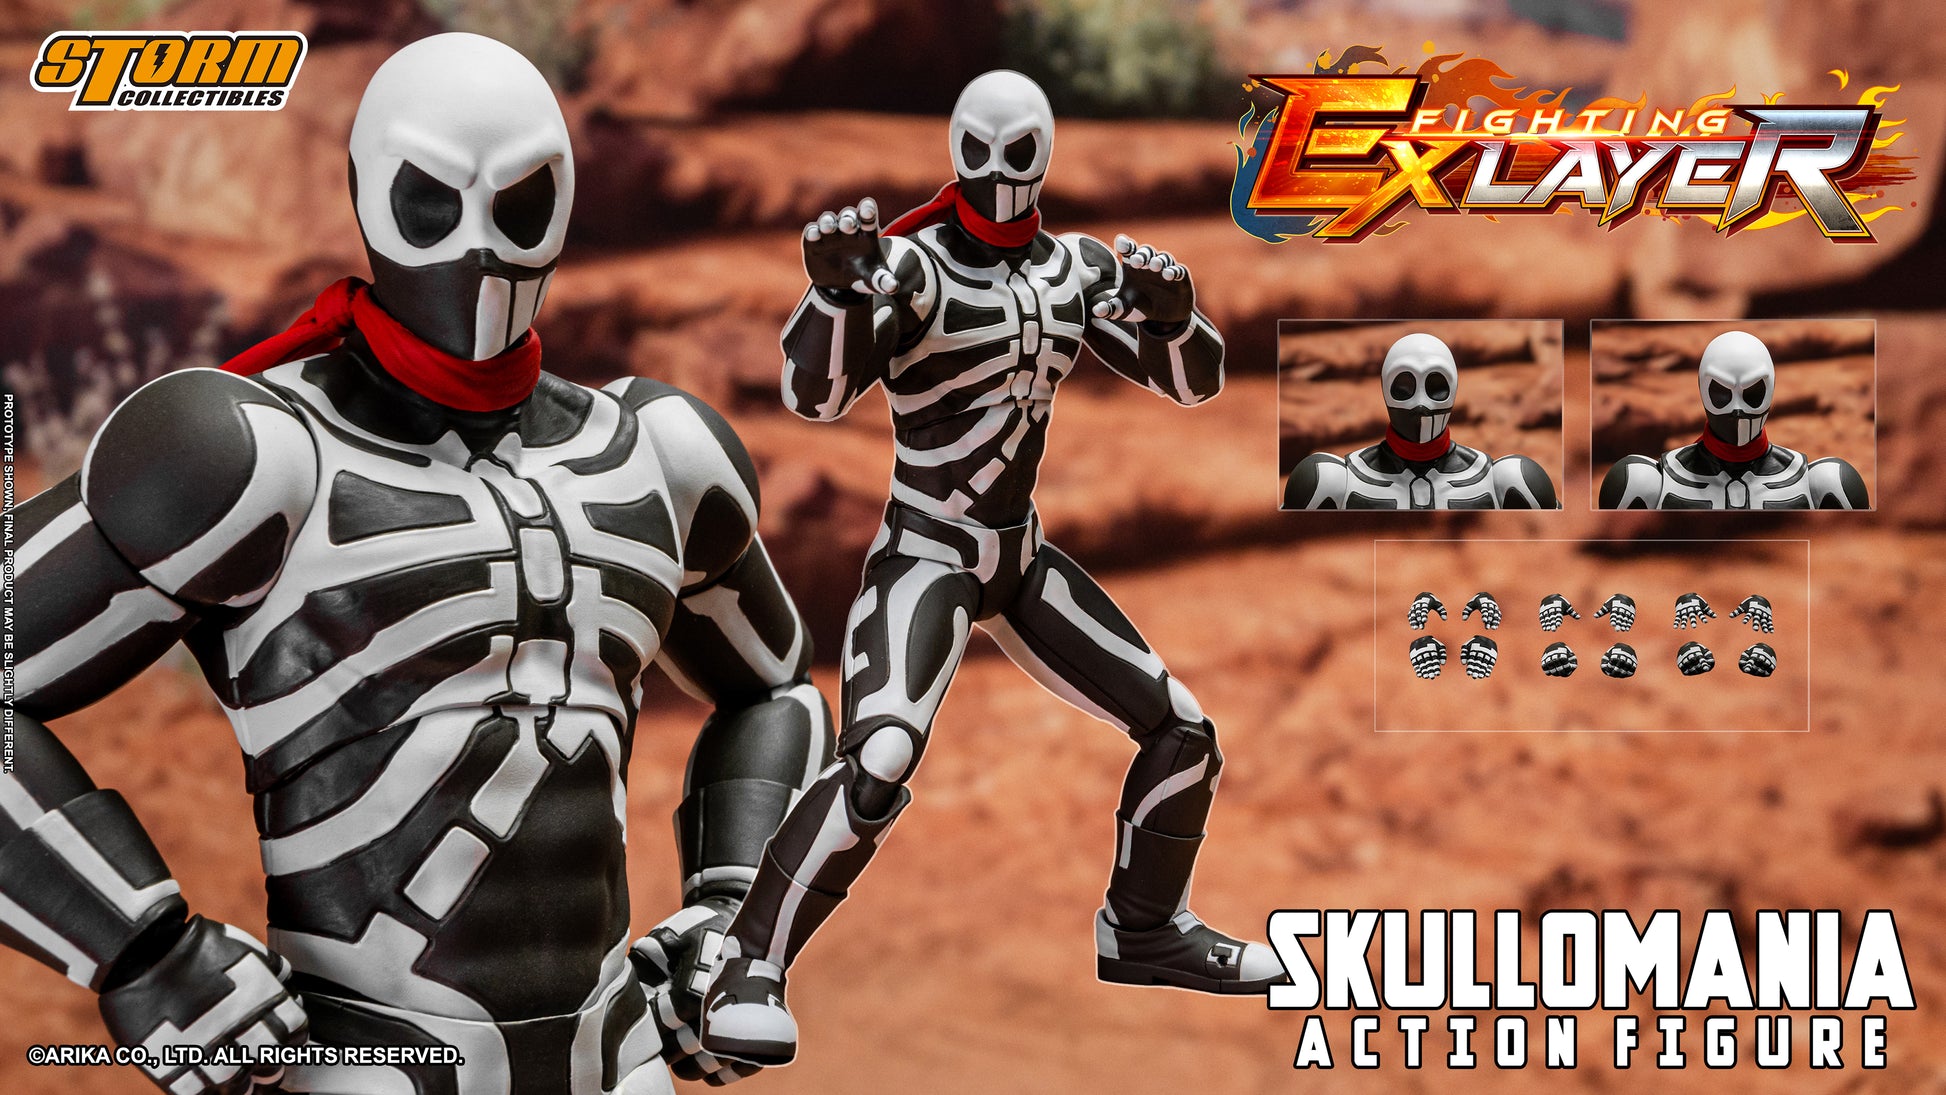 Street Fighter EX Layer Skullomania 1/12 Scale by Storm Collectibles showing all accessories